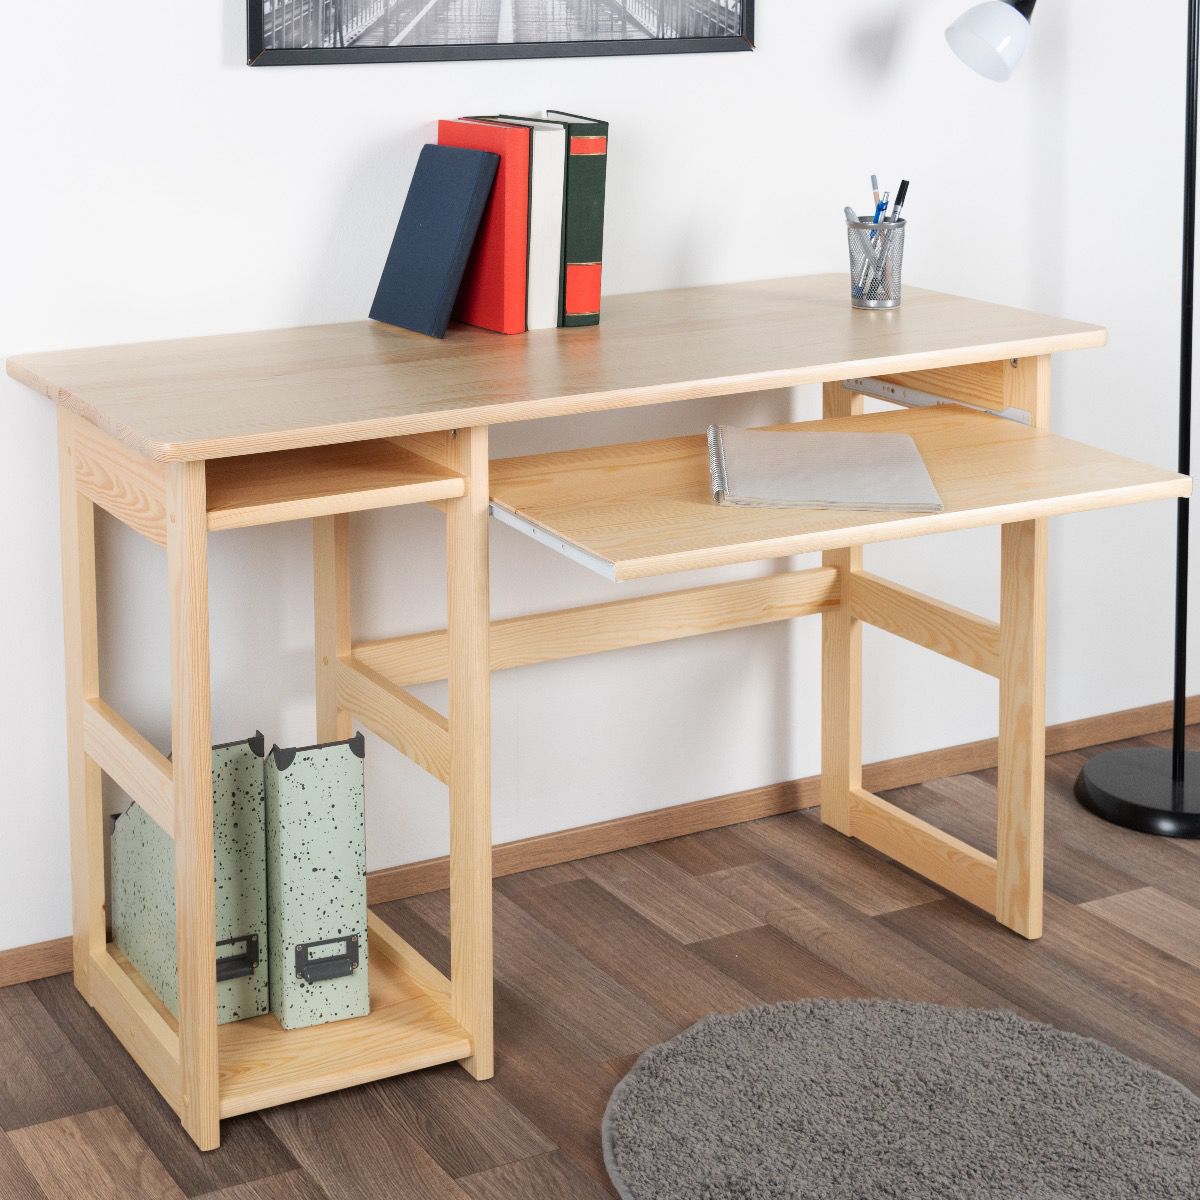 Desk solid pine solid wood natural Junco 194 - Dimensions 75 x 120 x 50 cm